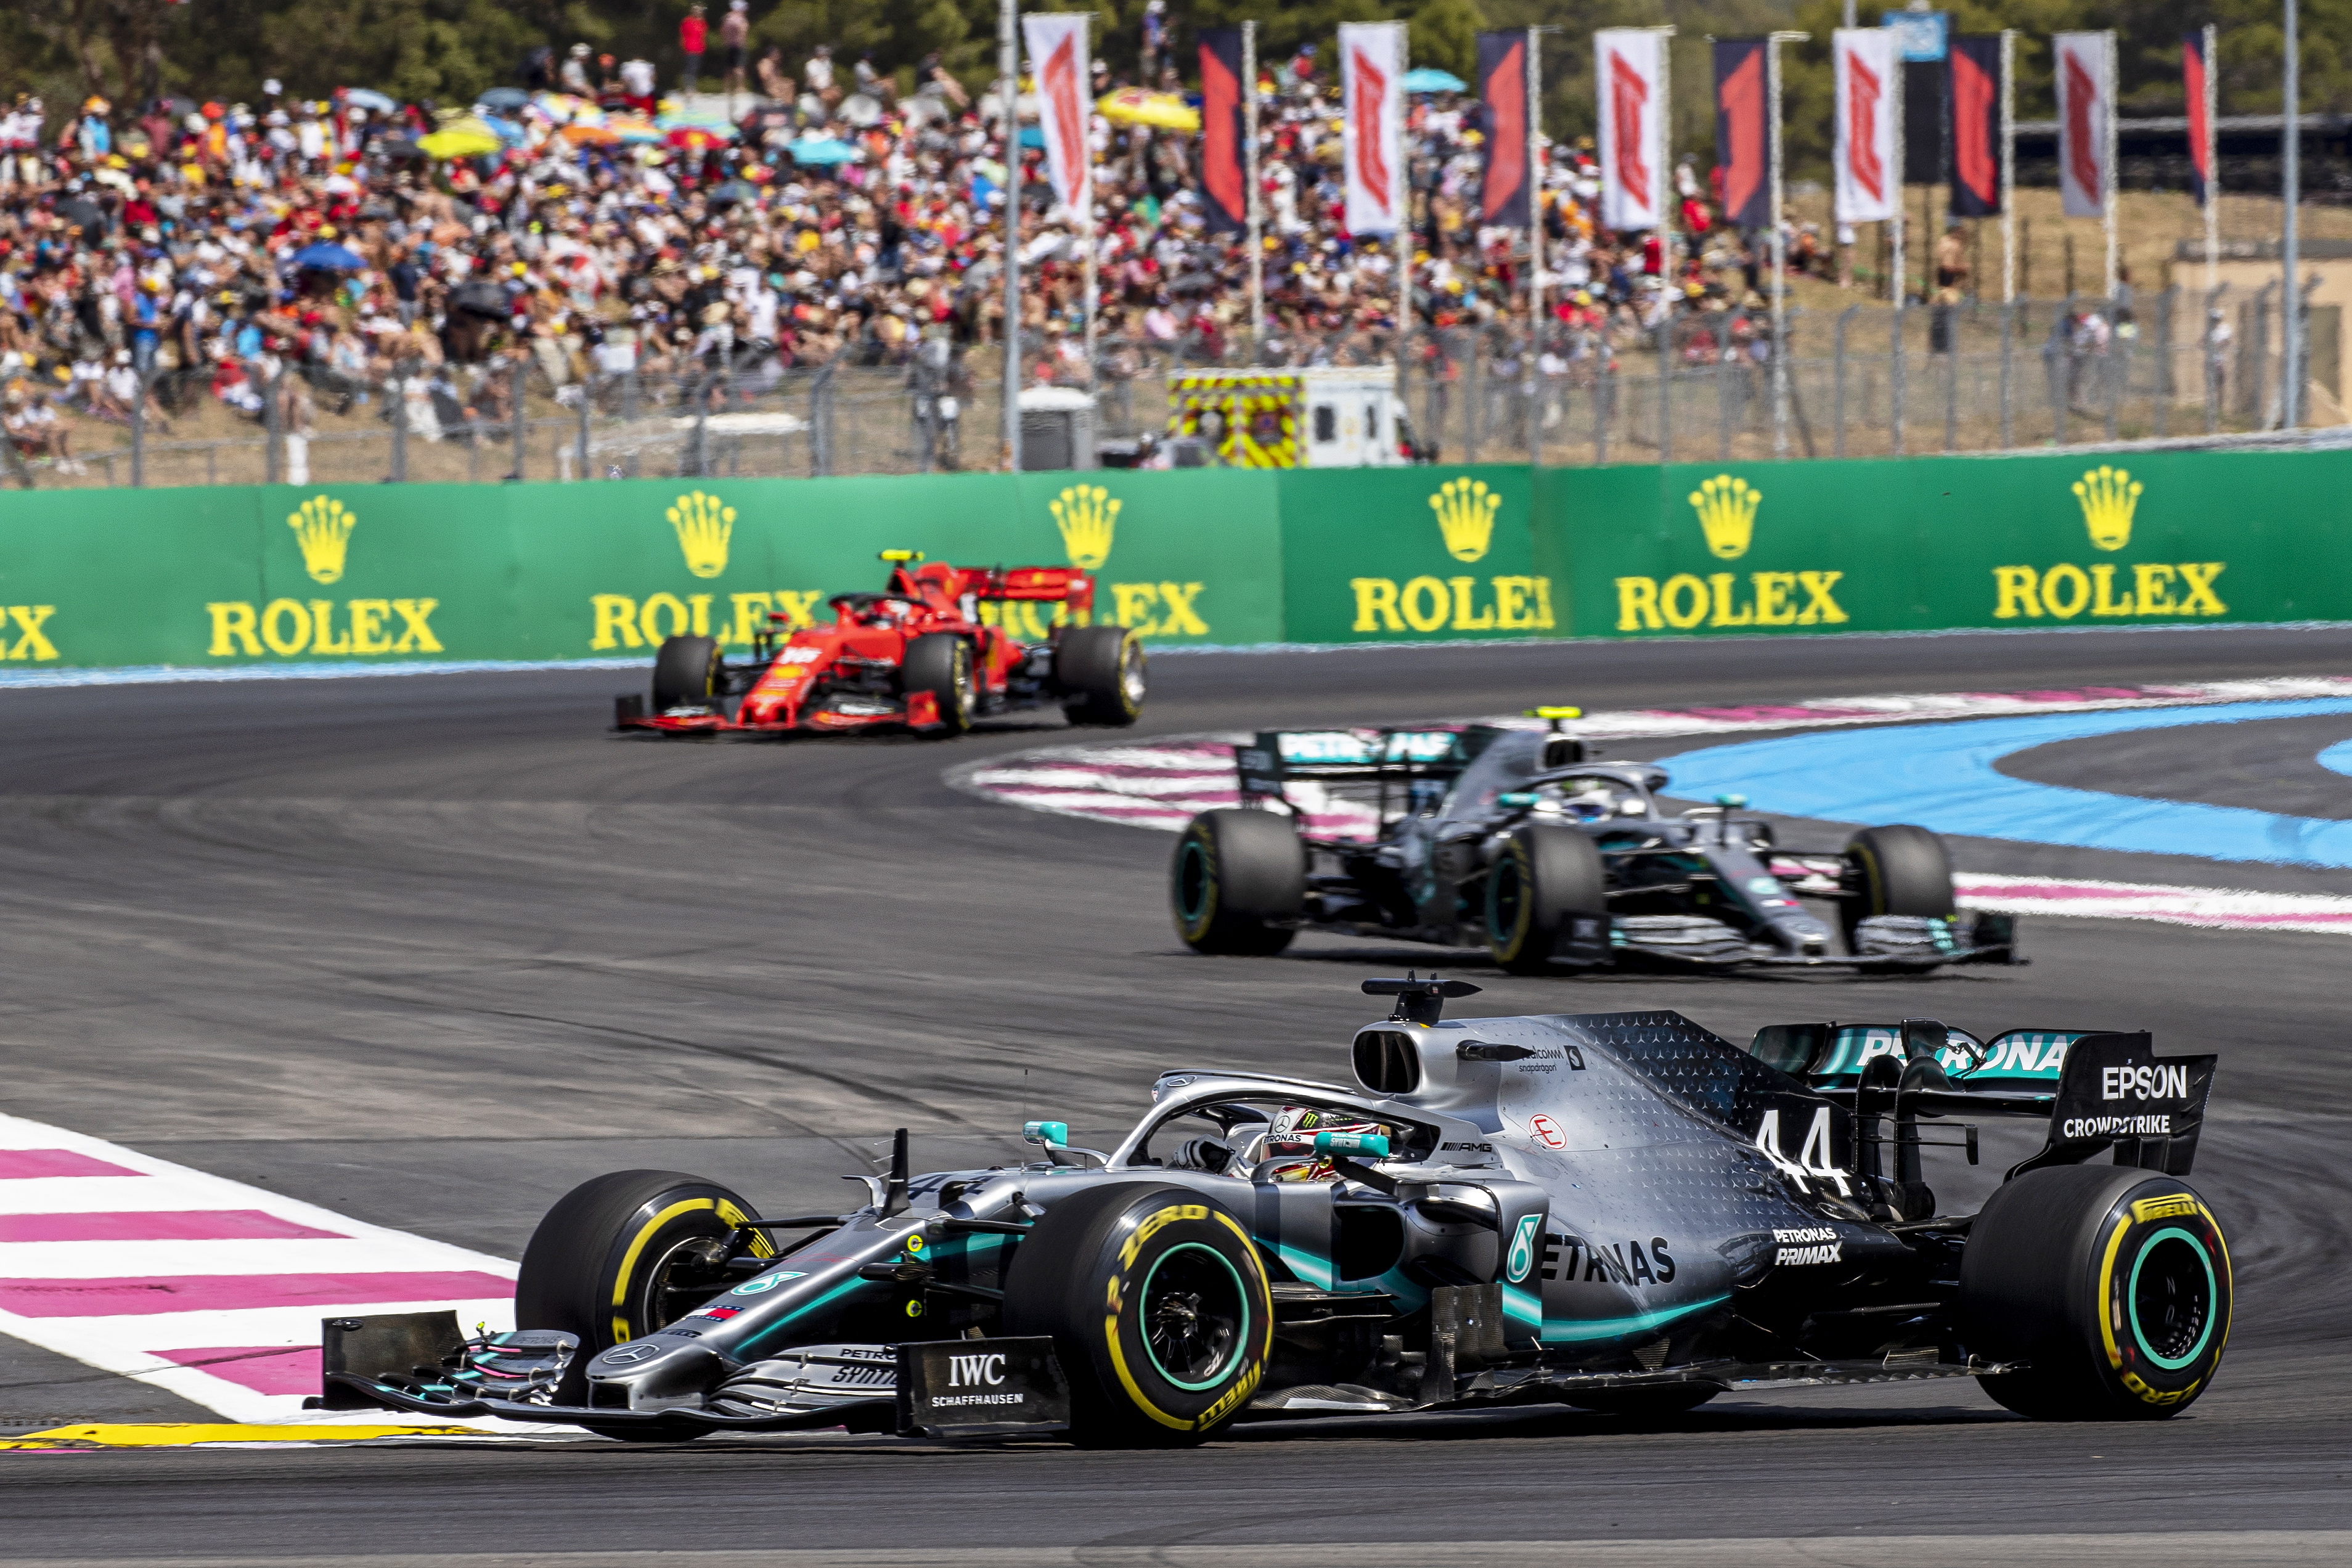 epa07668078 British Formula One driver Lewis Hamilton (front) of Mercedes AMG GP leads the pack during the 2019 French Formula One Grand Prix at Paul Ricard circuit in Le Castellet, France, 23 June 2019.  EPA/VALDRIN XHEMAJ